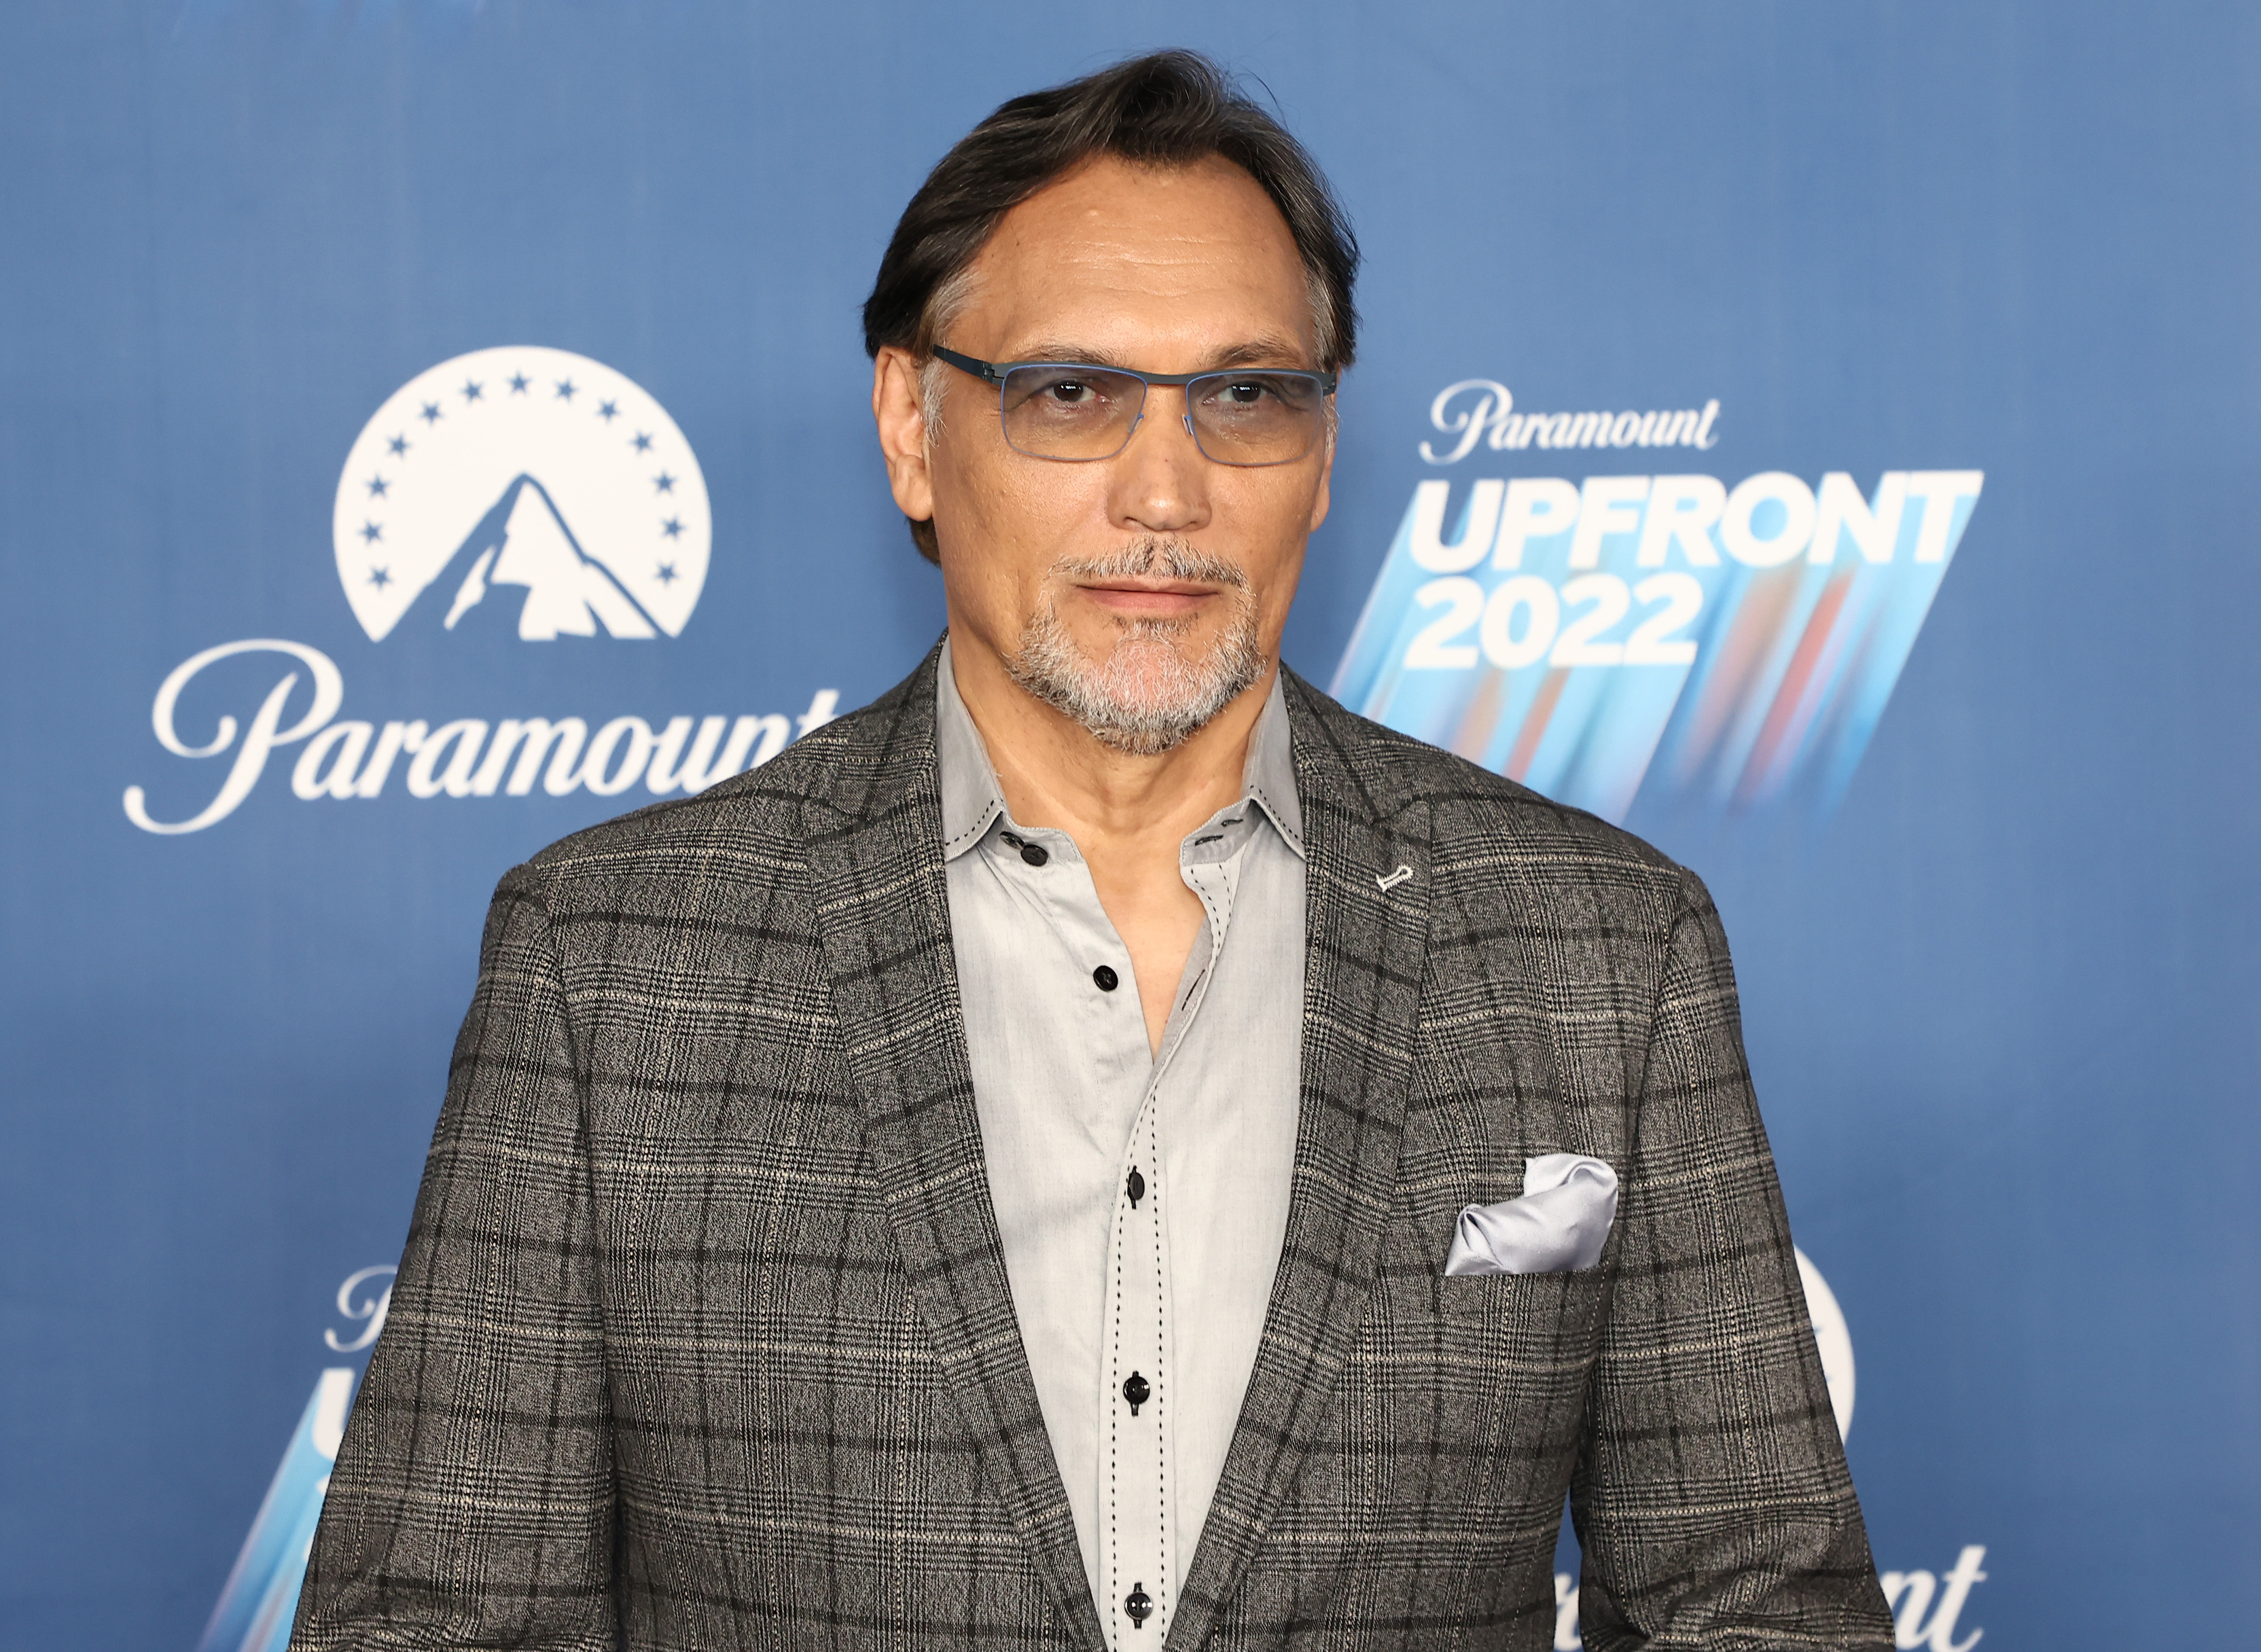 Jimmy Smits attends the 2022 Paramount Upfront at 666 Madison Avenue on May 18, 2022, in New York City. | Source: Getty Images